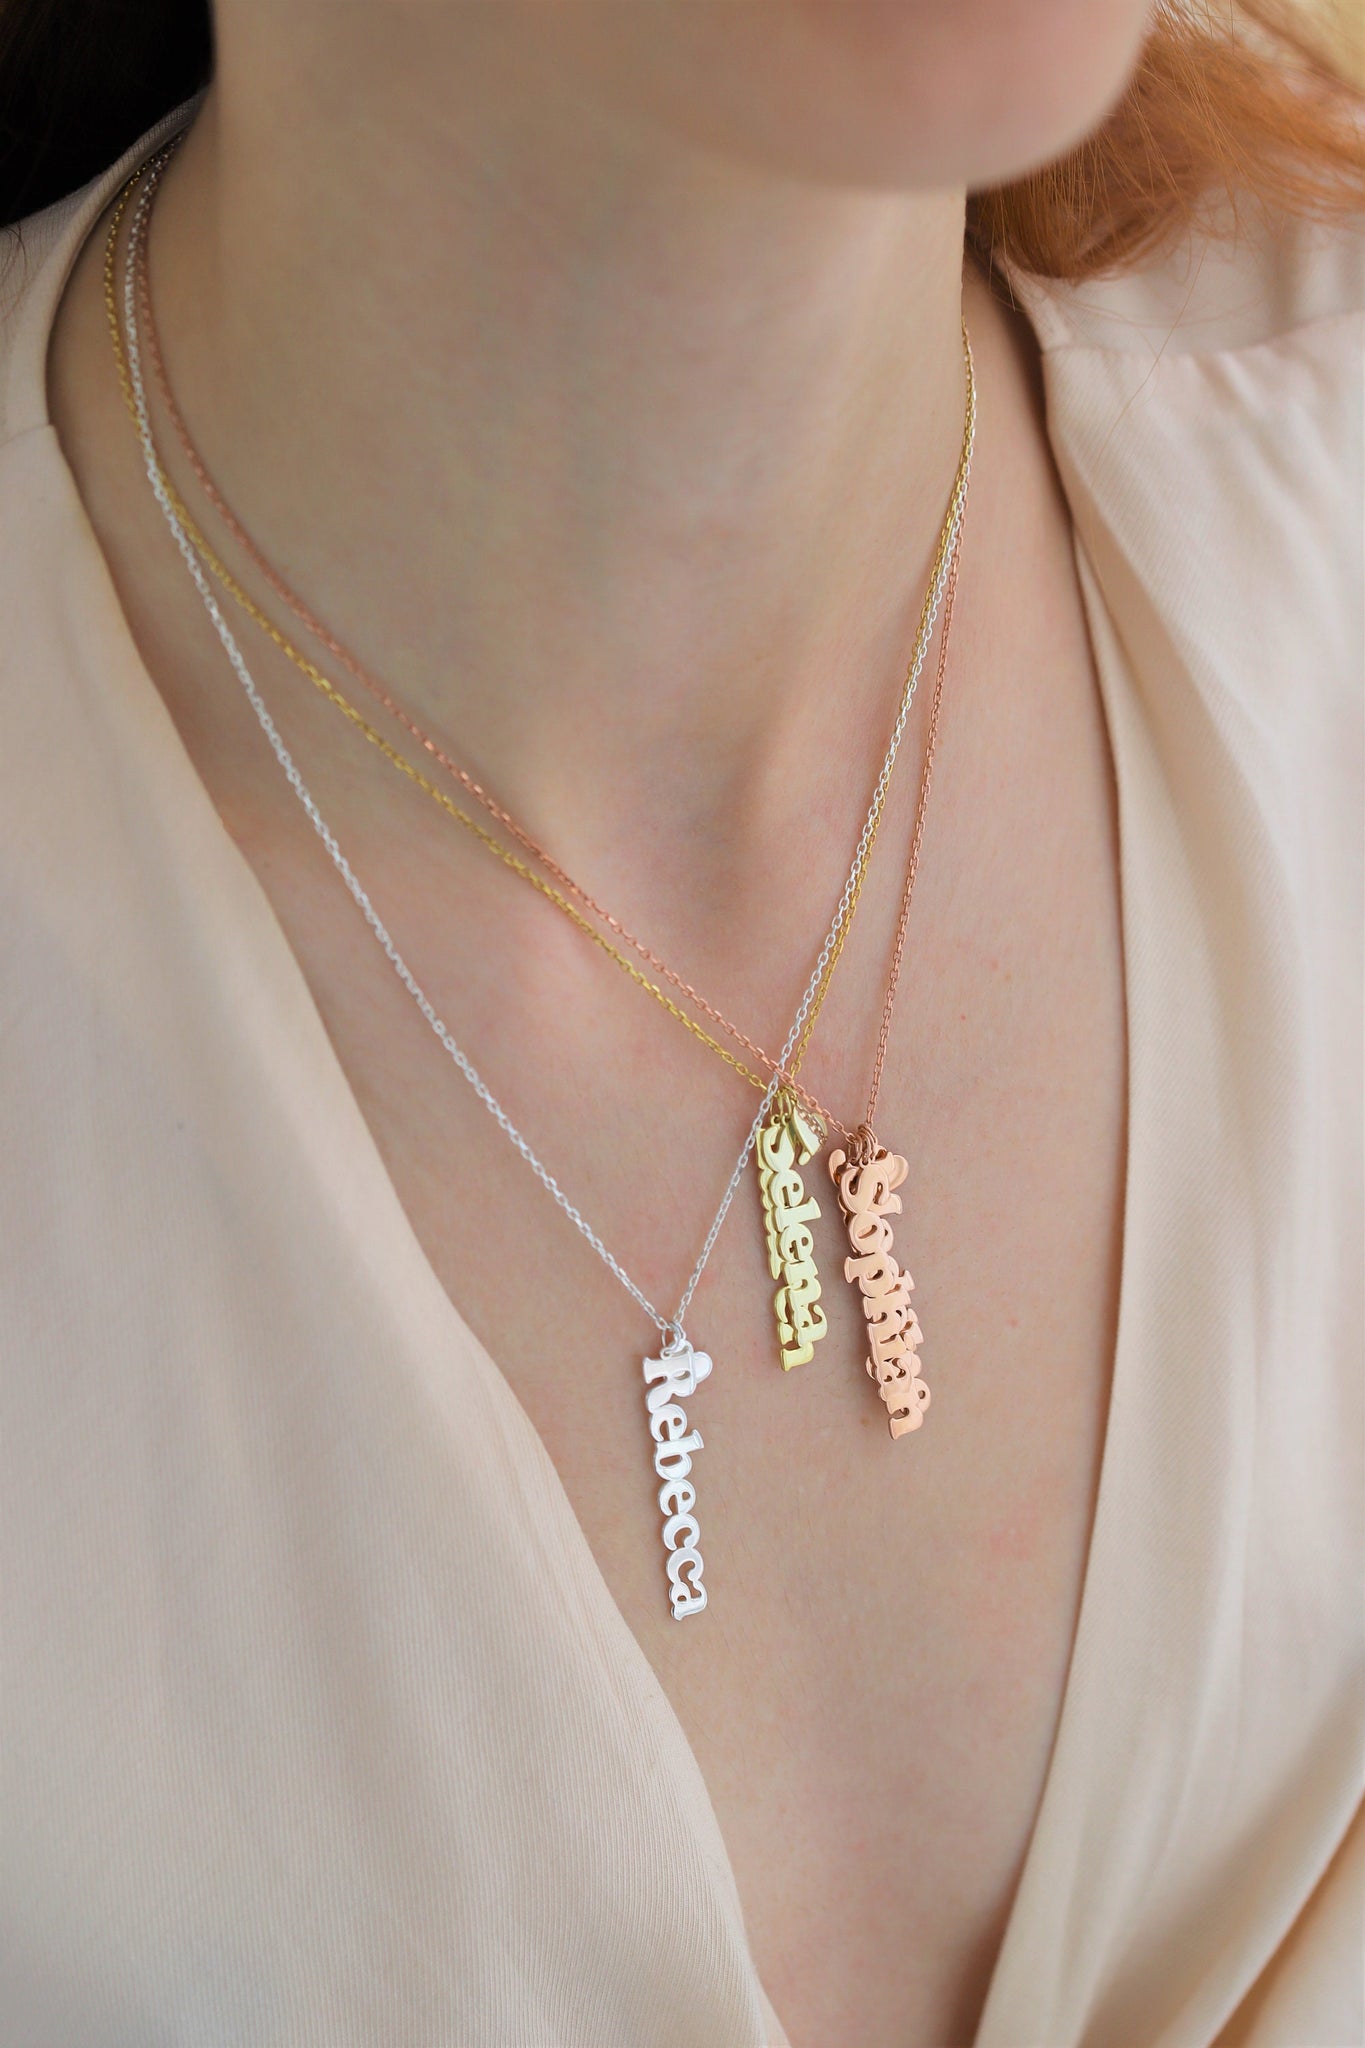 Custom Vertical Name Necklace, Mothers Day Necklace, Personalized Dangle Name Necklace, Family Name Necklace, Dainty Heart Charm Necklace